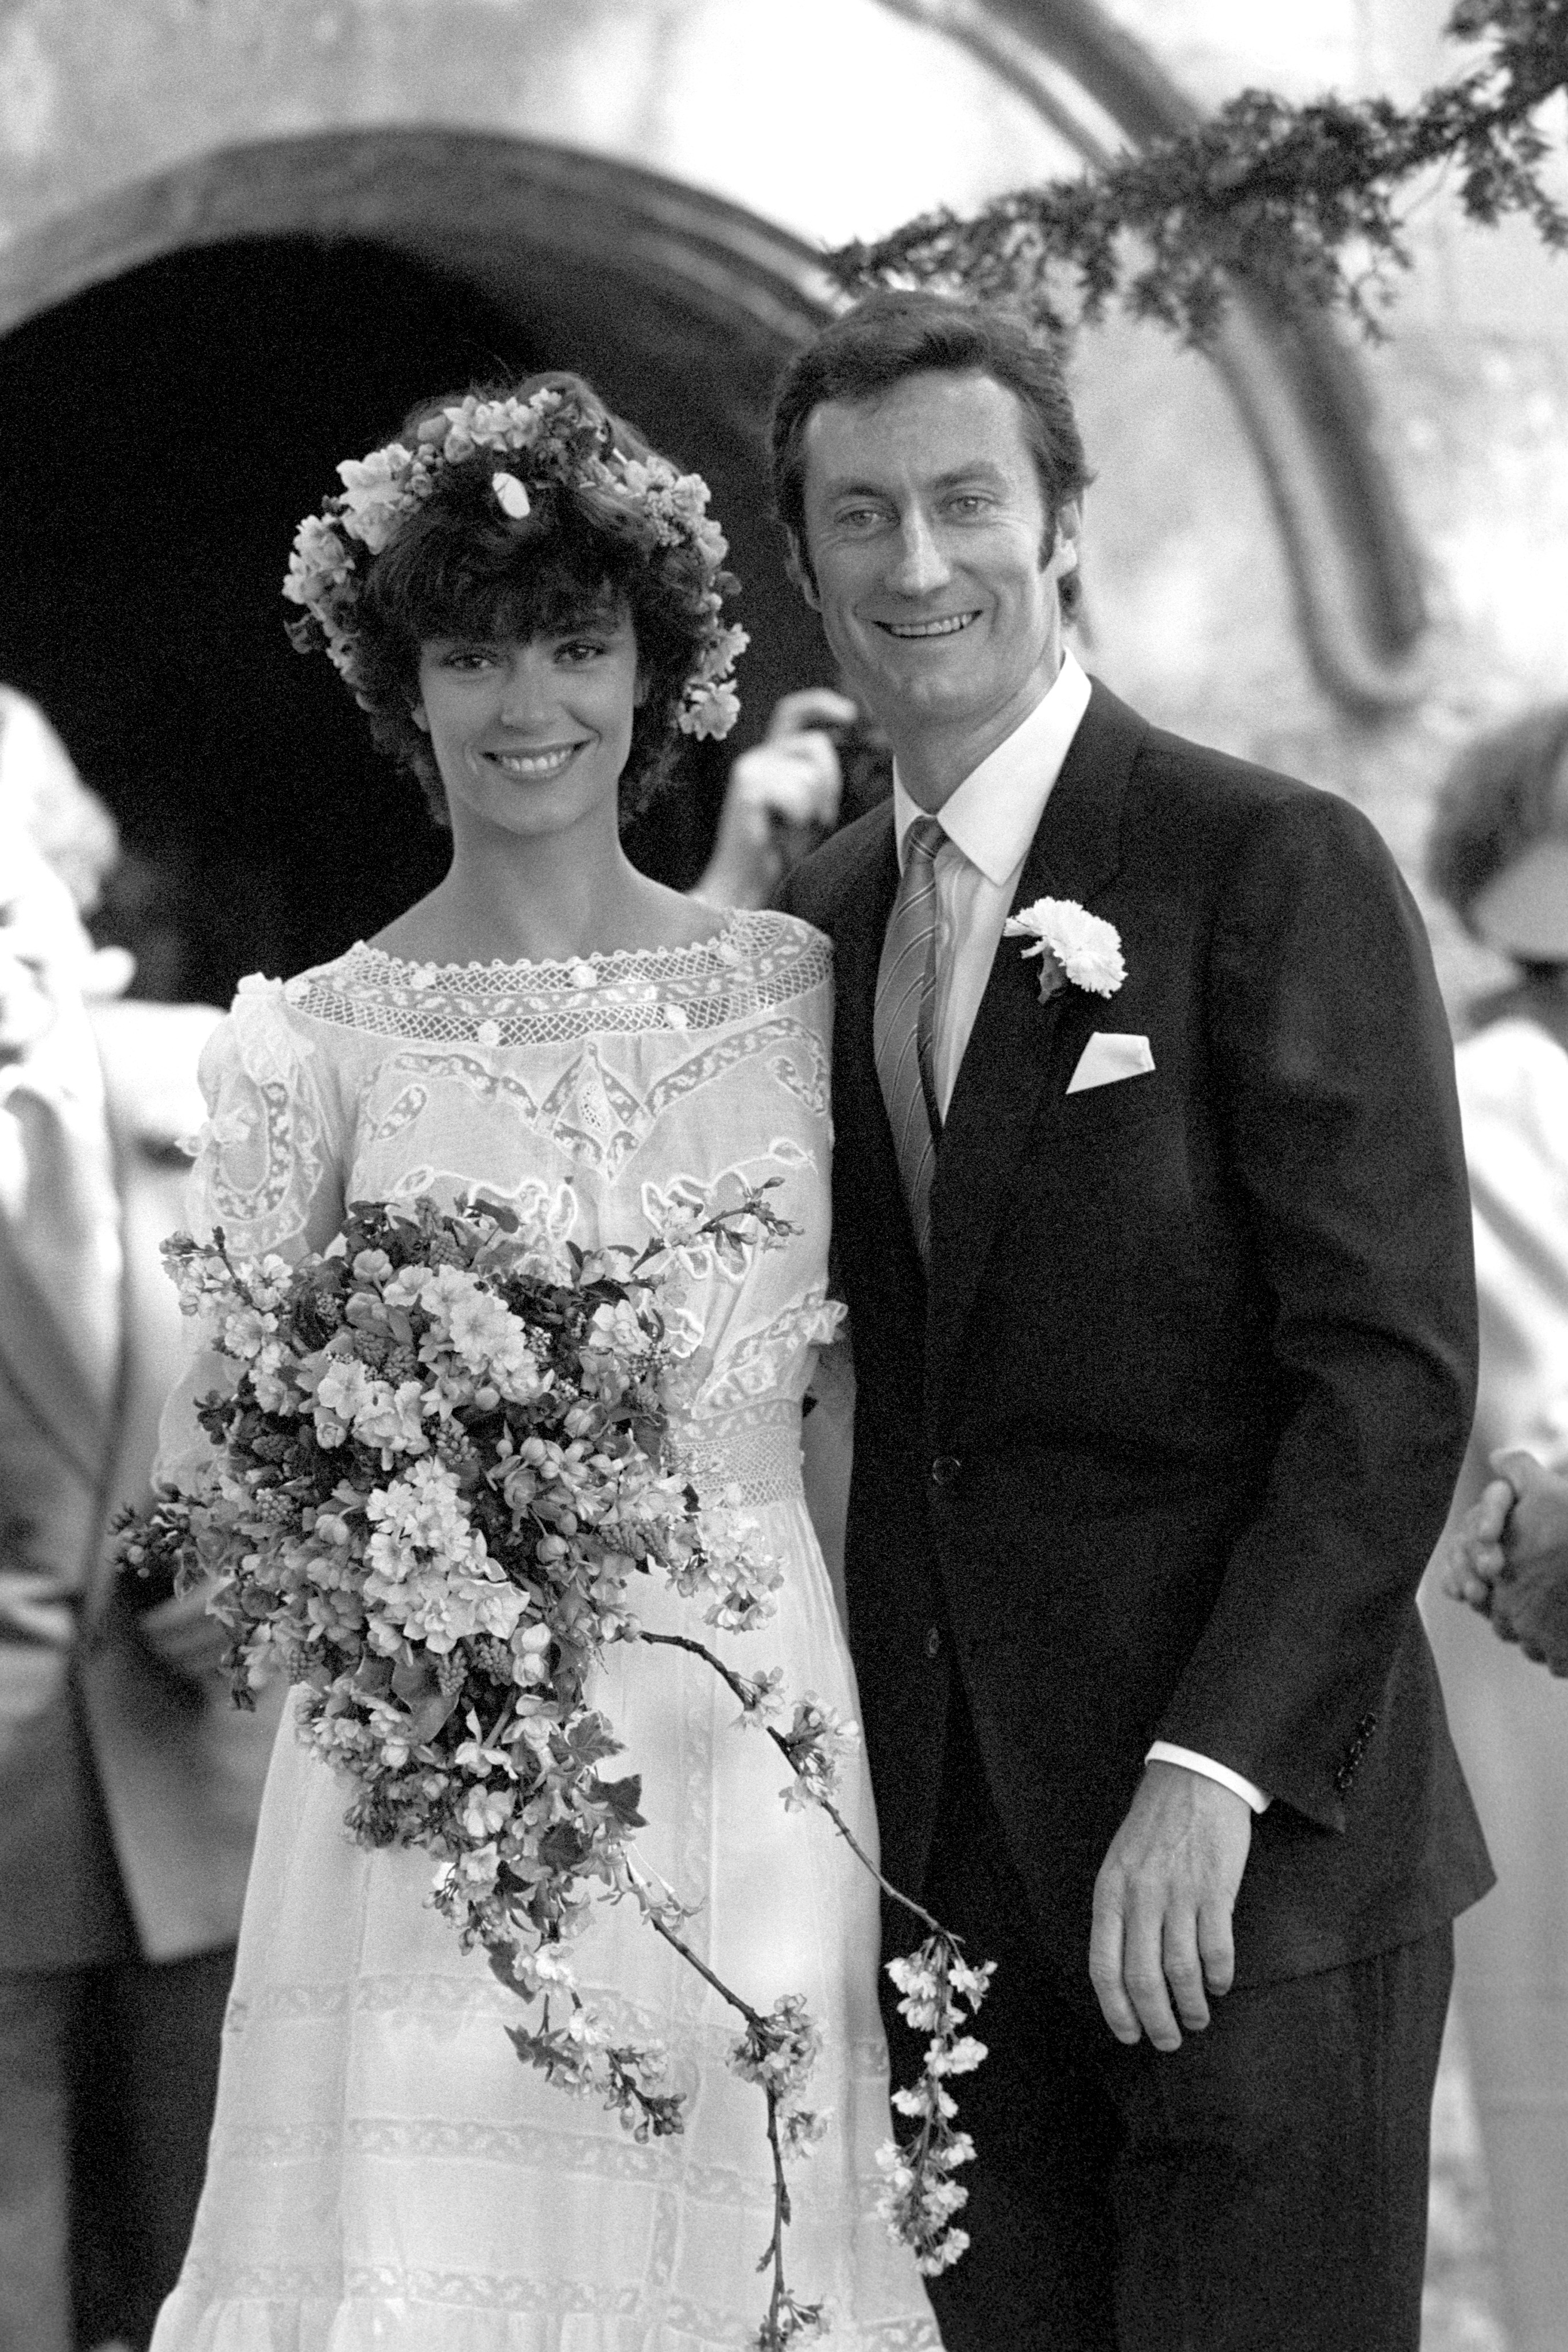 Rachel Ward and Bryan Brown at their wedding at Ward's father's estate in 1983 | Source: Getty Images